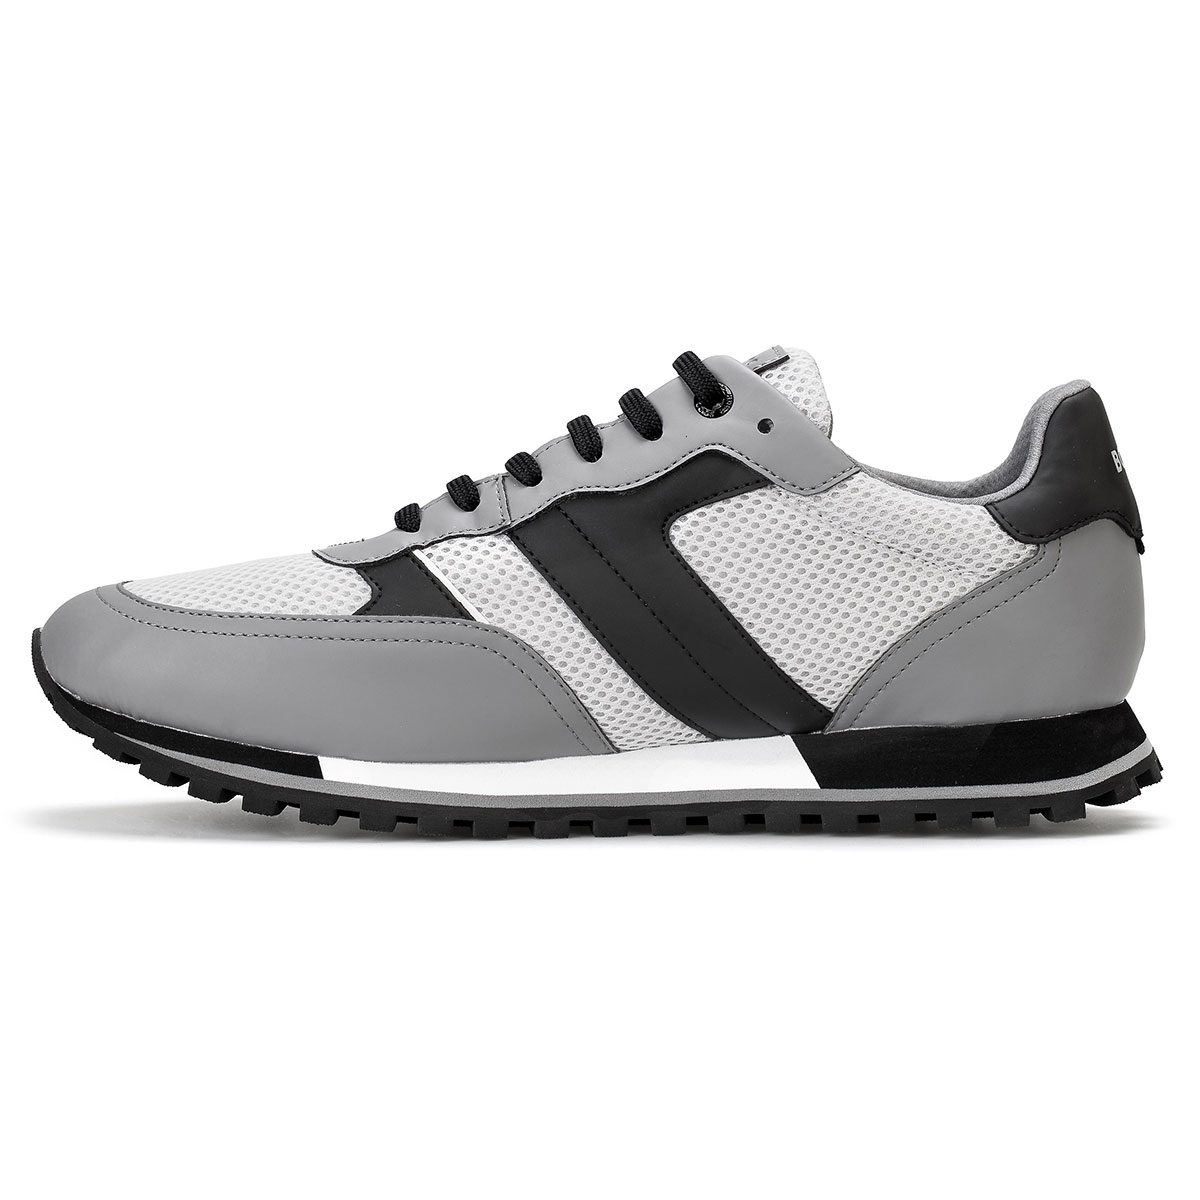 Hugo Boss Men's Parkour-L Running-Style Golf Trainers from american golf